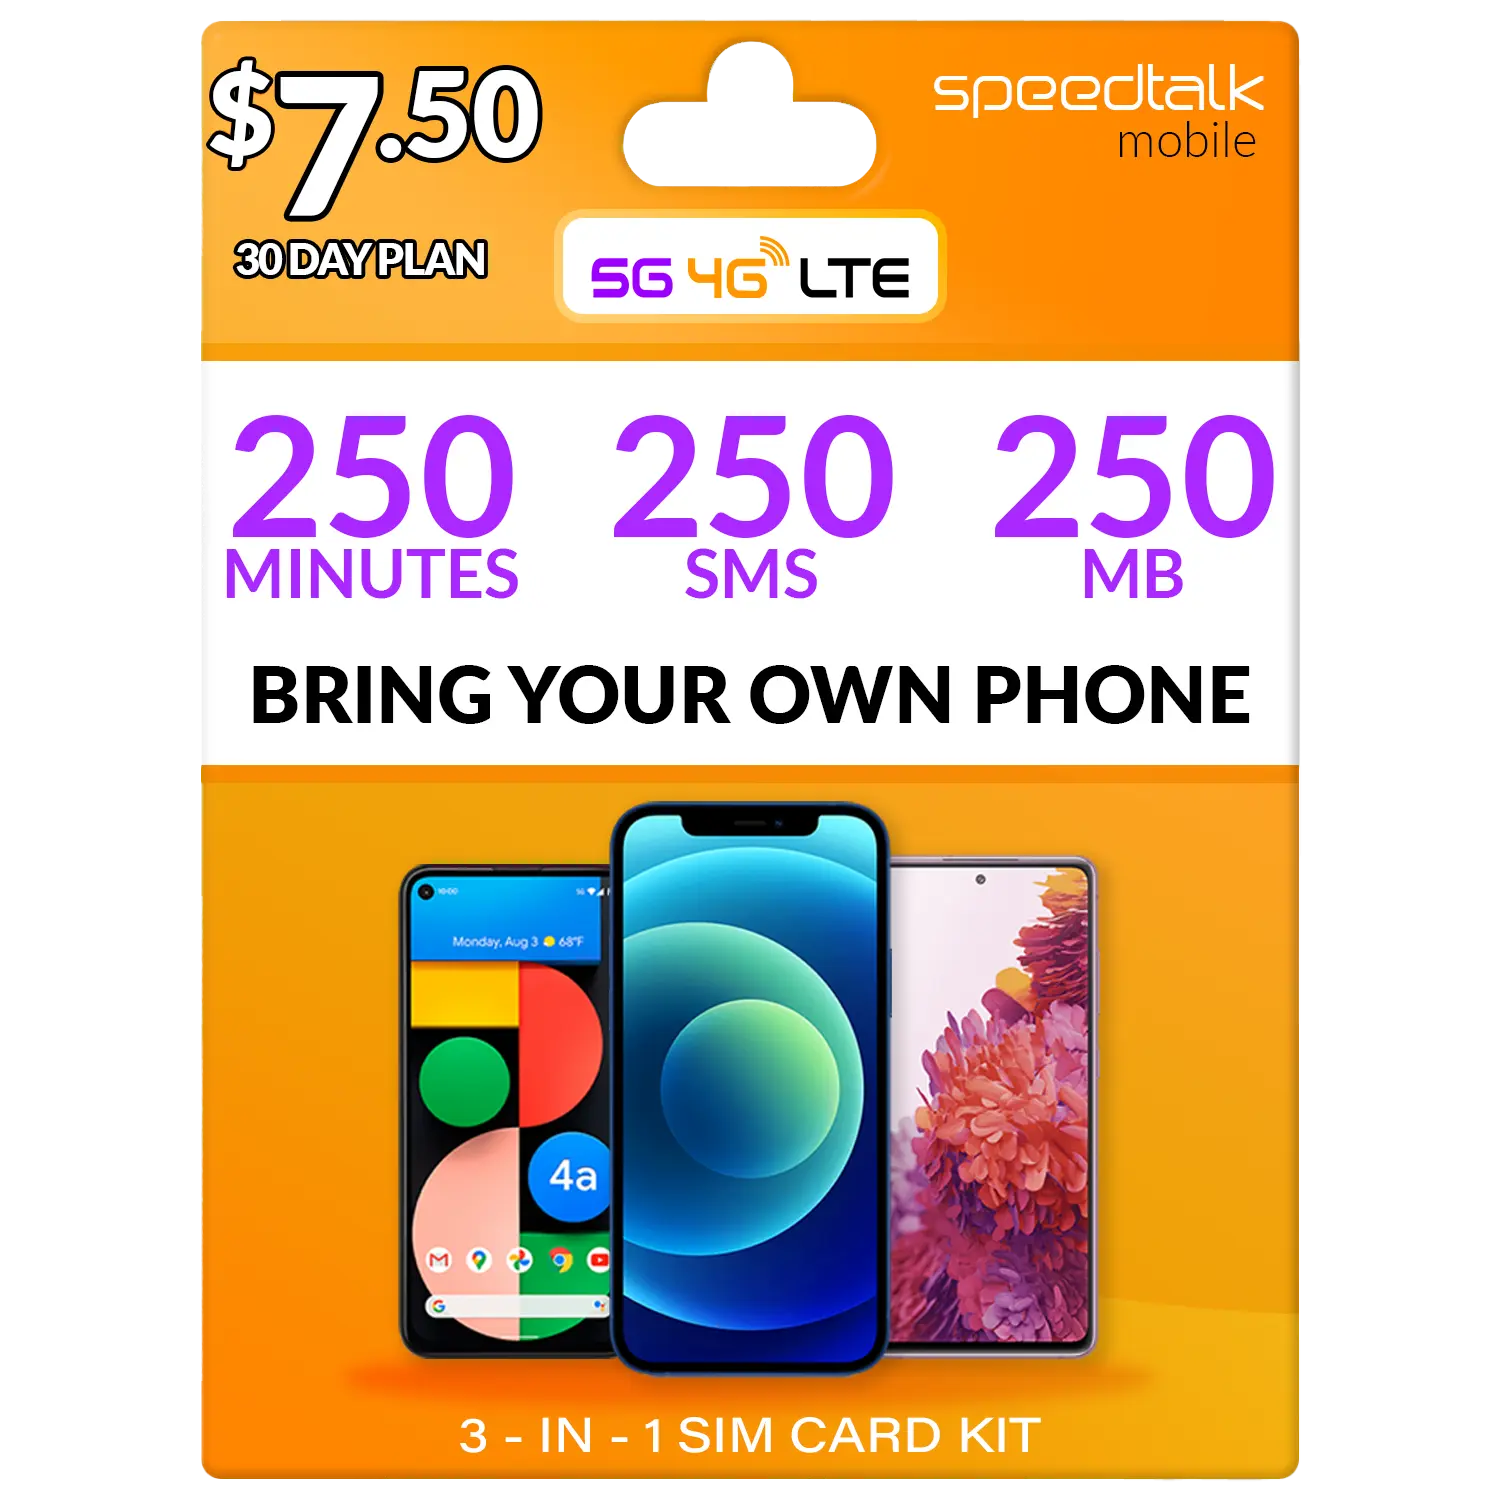 250 TEXT- 250 TALK-250MB OD DATA FOR 7 DOLLARS AND 50 CENTS